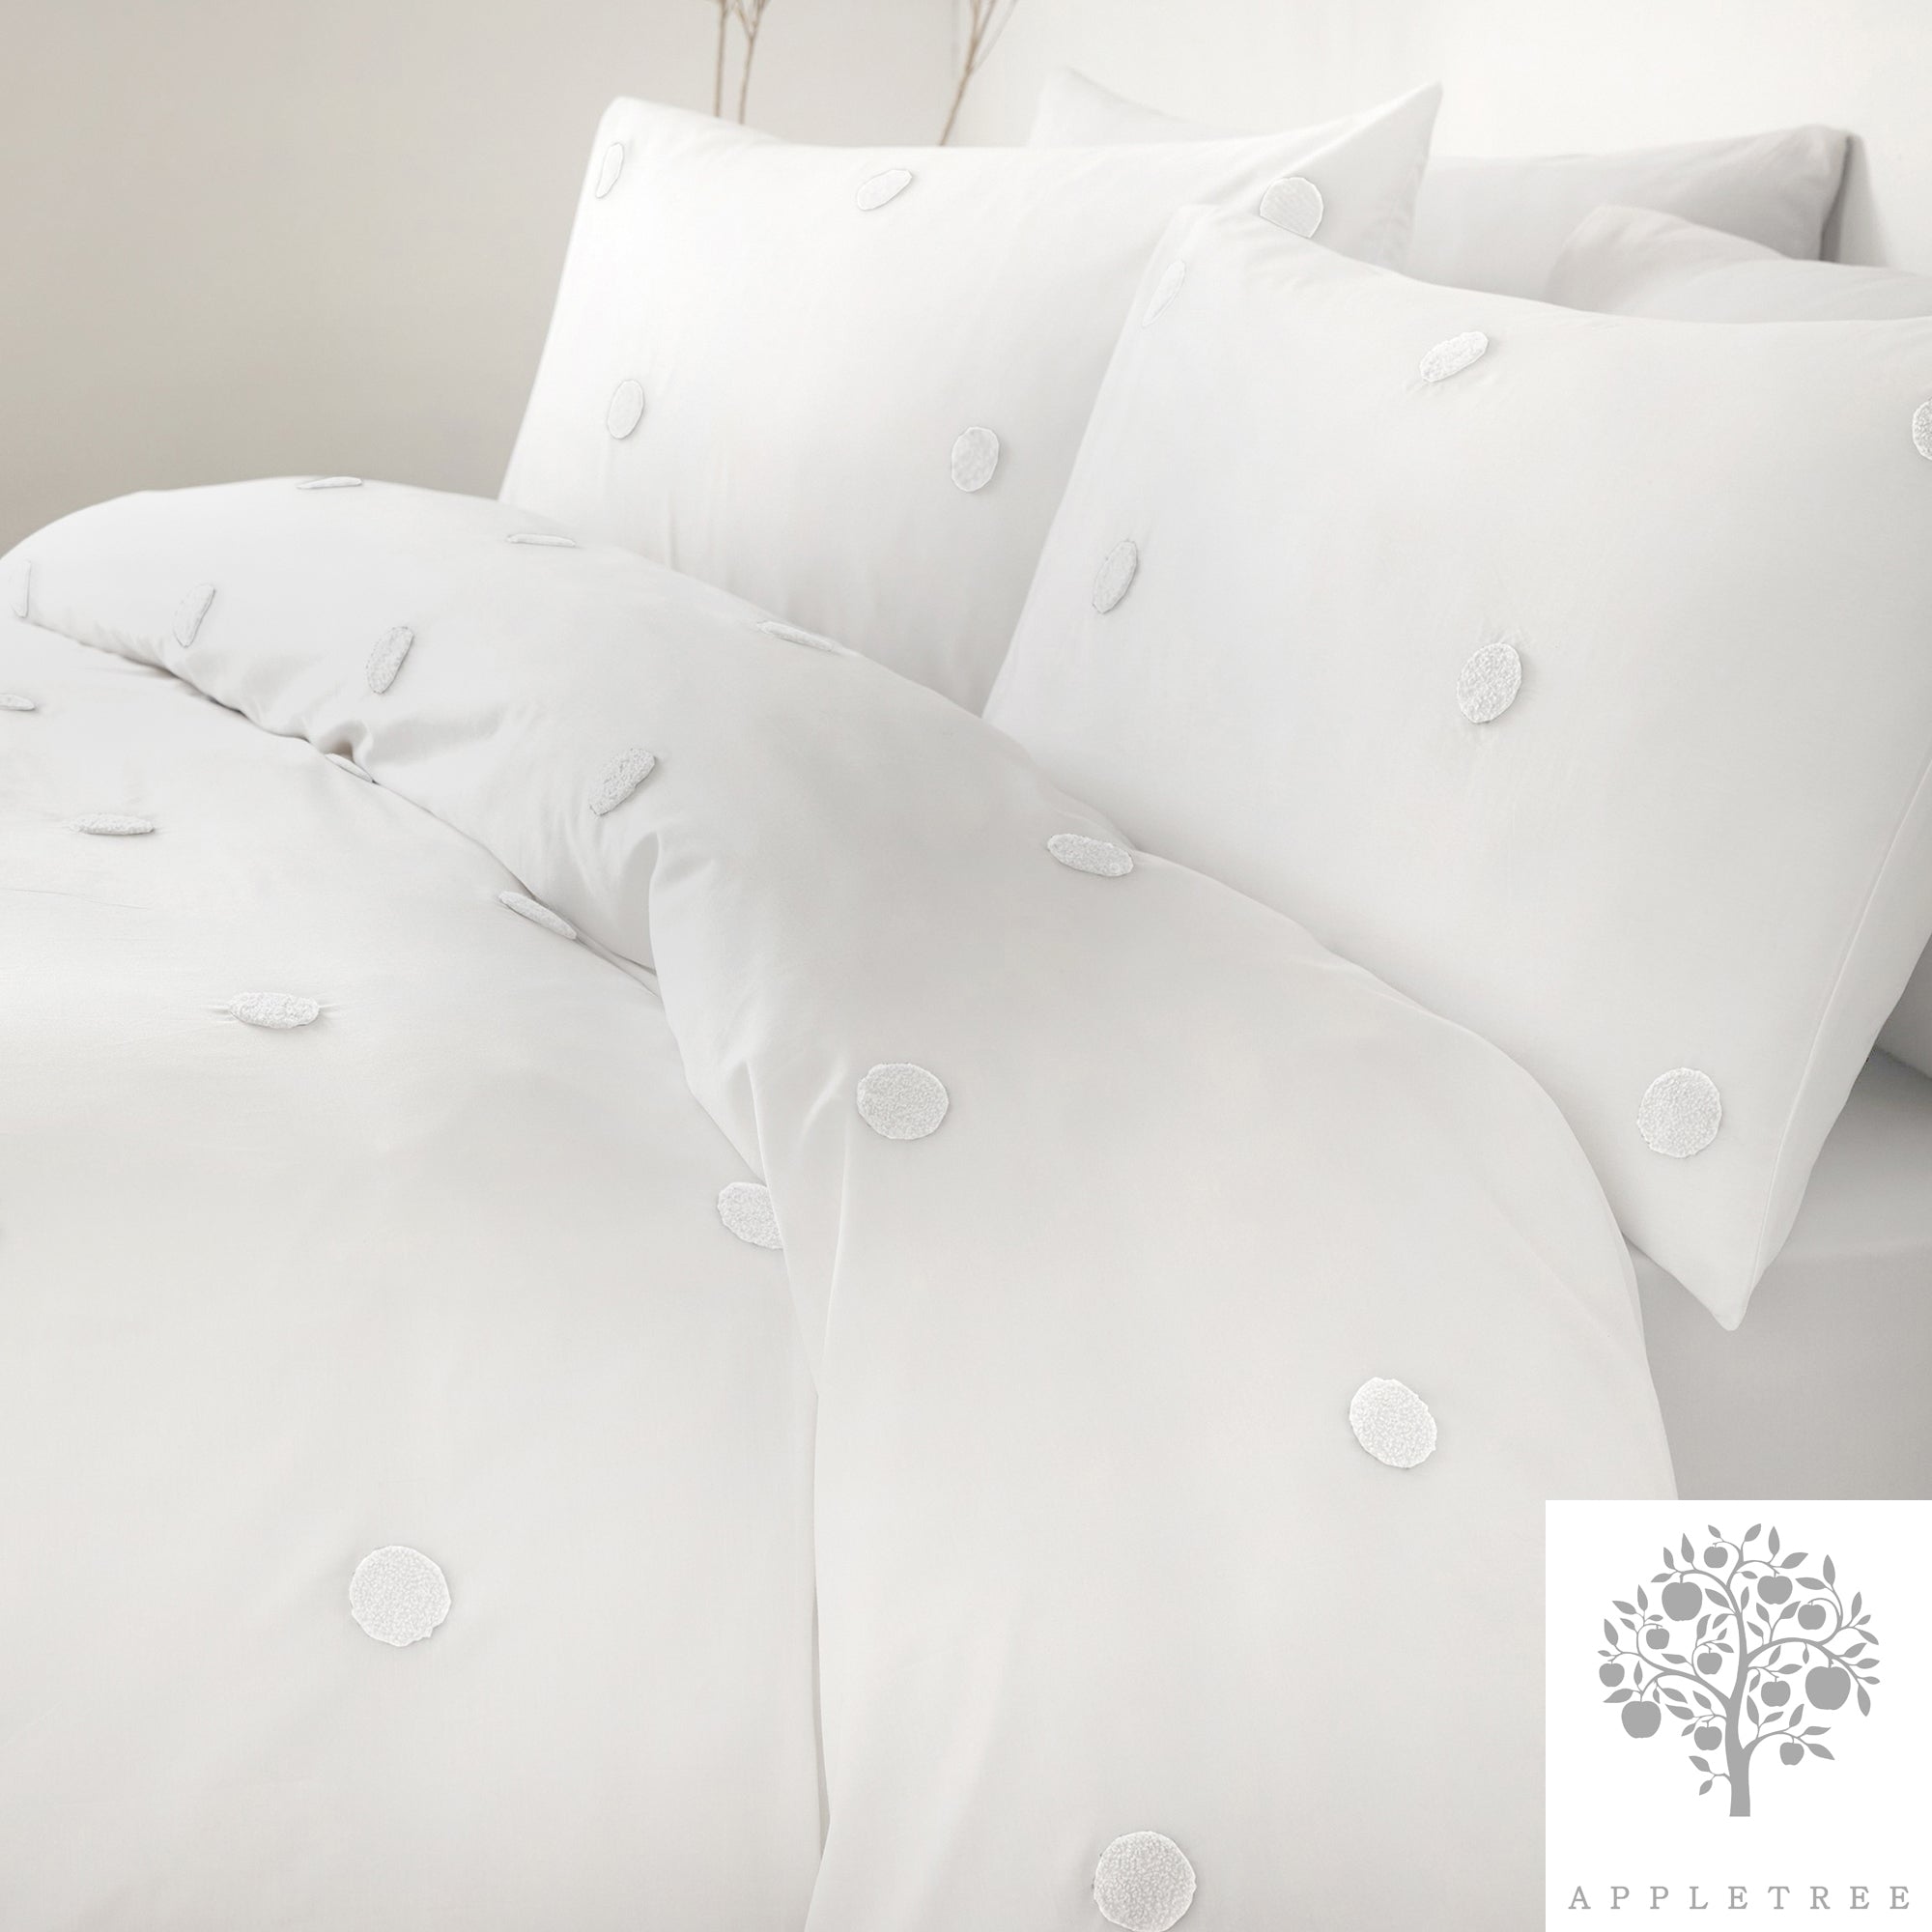 Dot Garden - 100% Cotton Duvet Cover Set in White - by Appletree Boutique